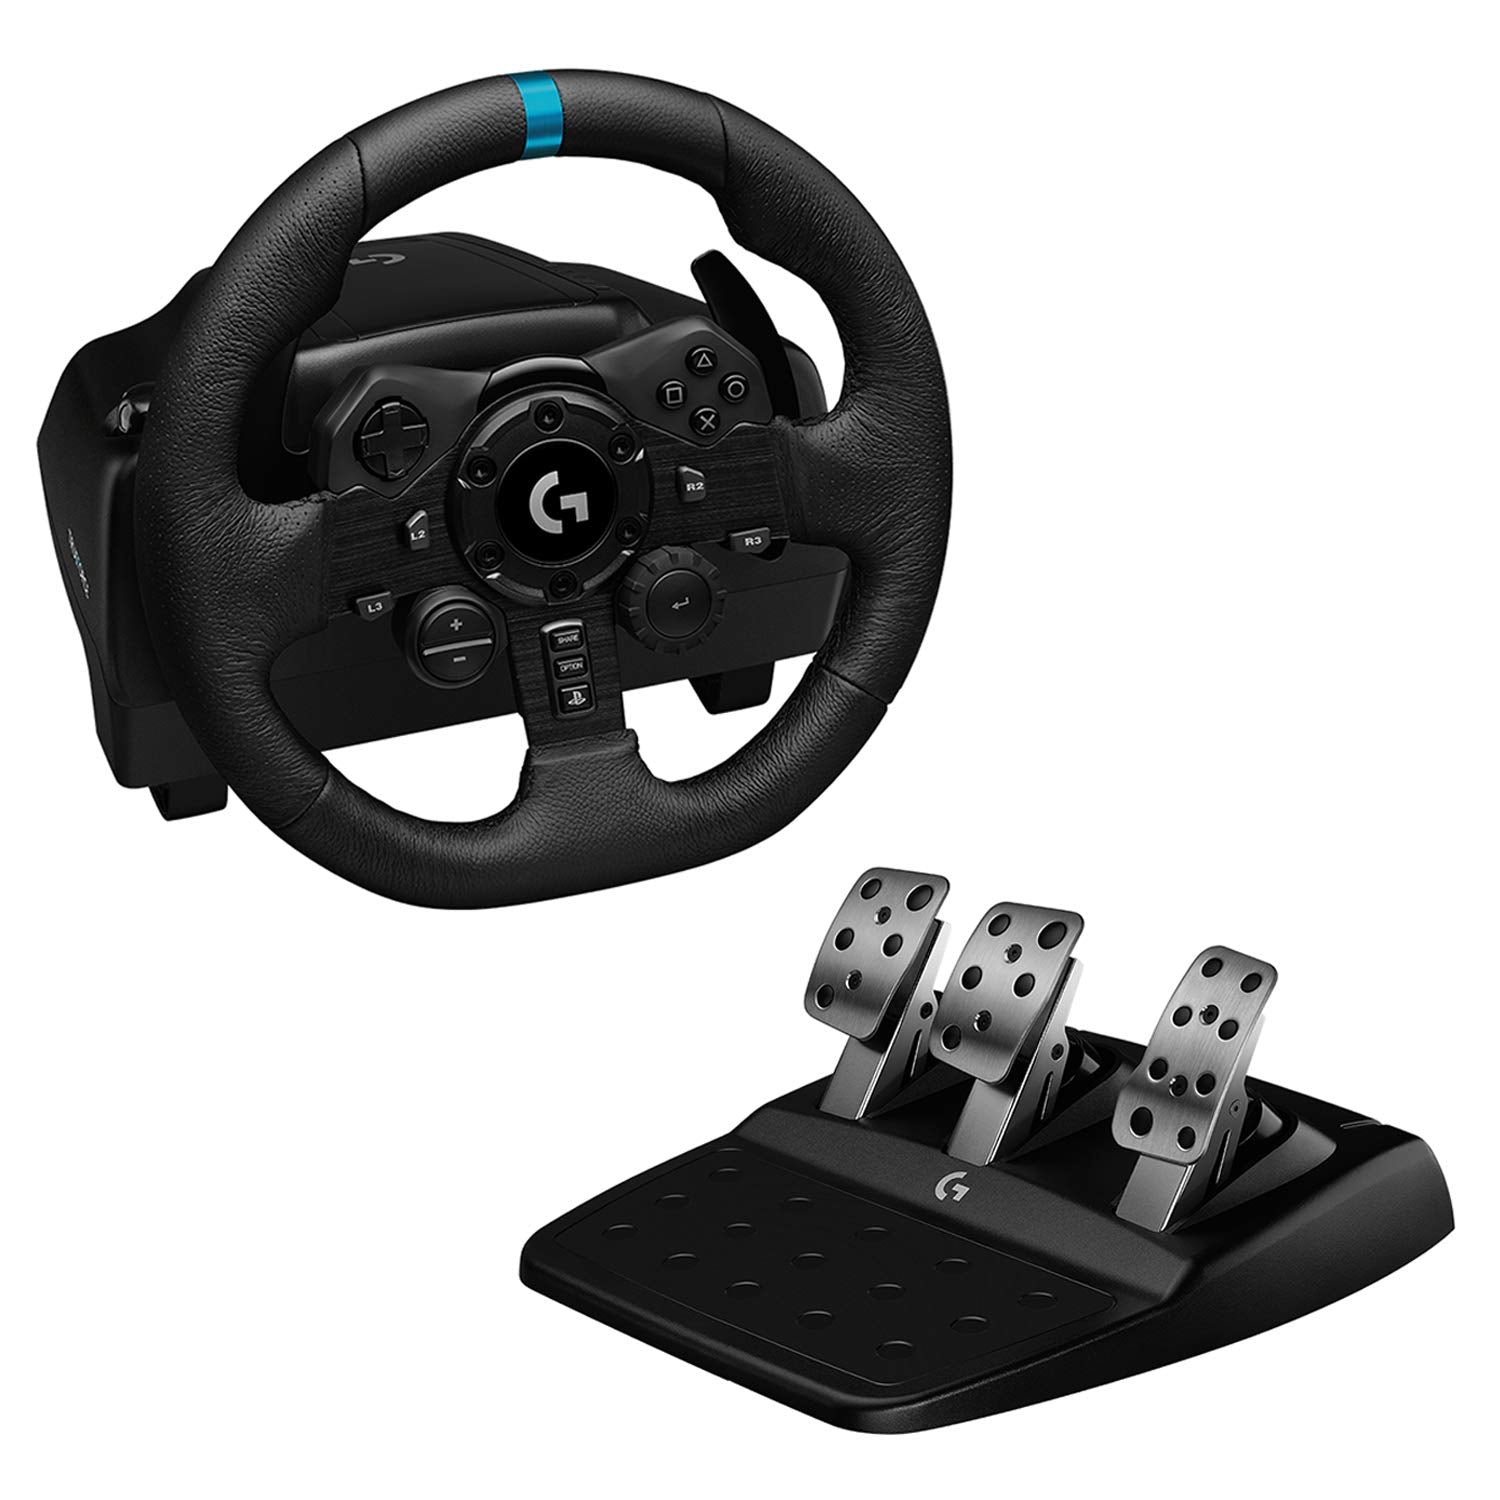 Logitech G923 Racing Wheel and Pedals for PS5, PS4 and PC - Black (New)